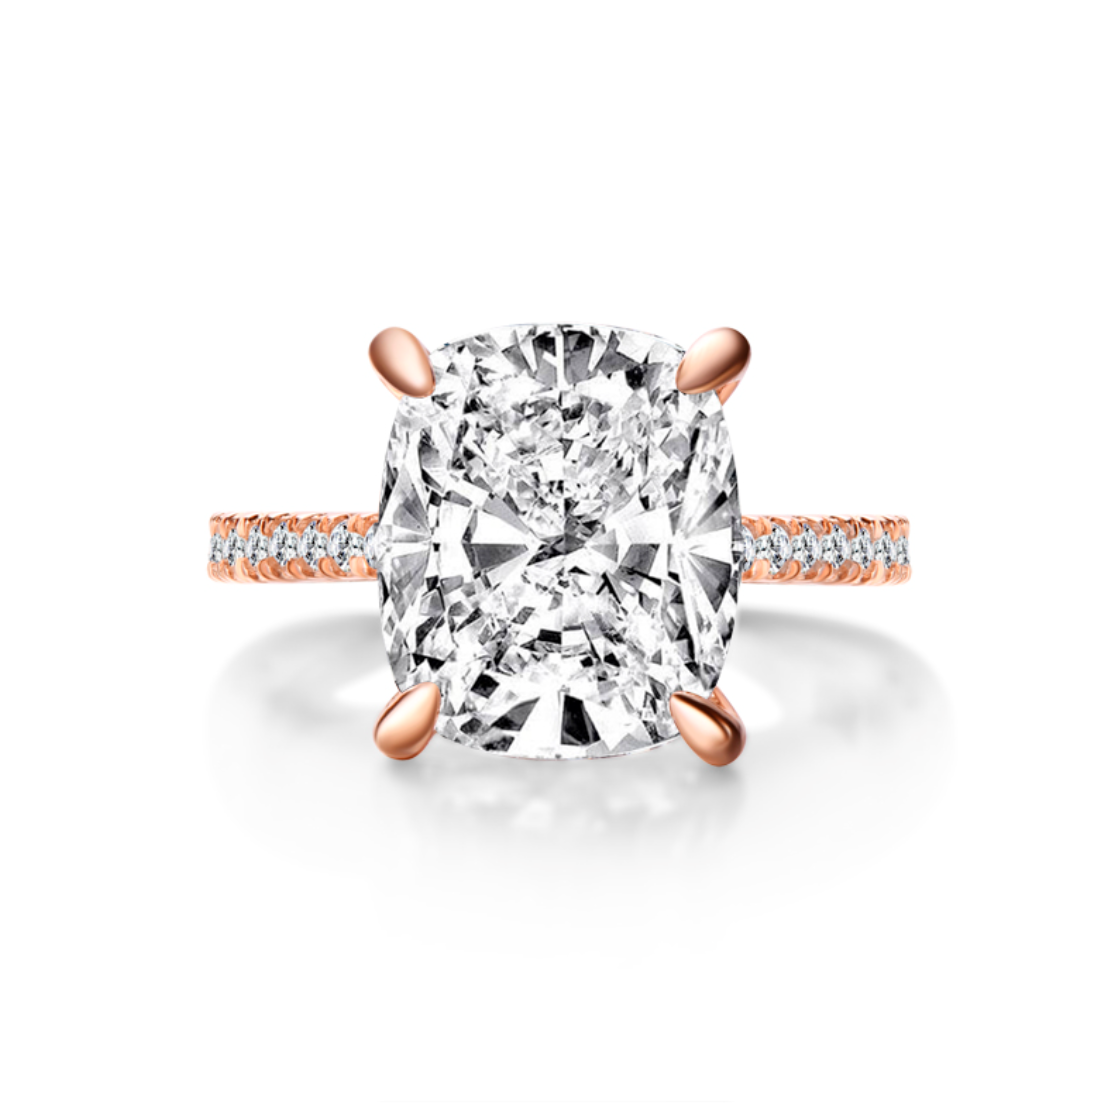 Cushion Cut Ring Solitaire Ring Cushion Moissanite Ring Cushion Cut Diamond Ring For Women Engagement Ring 6 carat ring cushion promise ring rose gold front